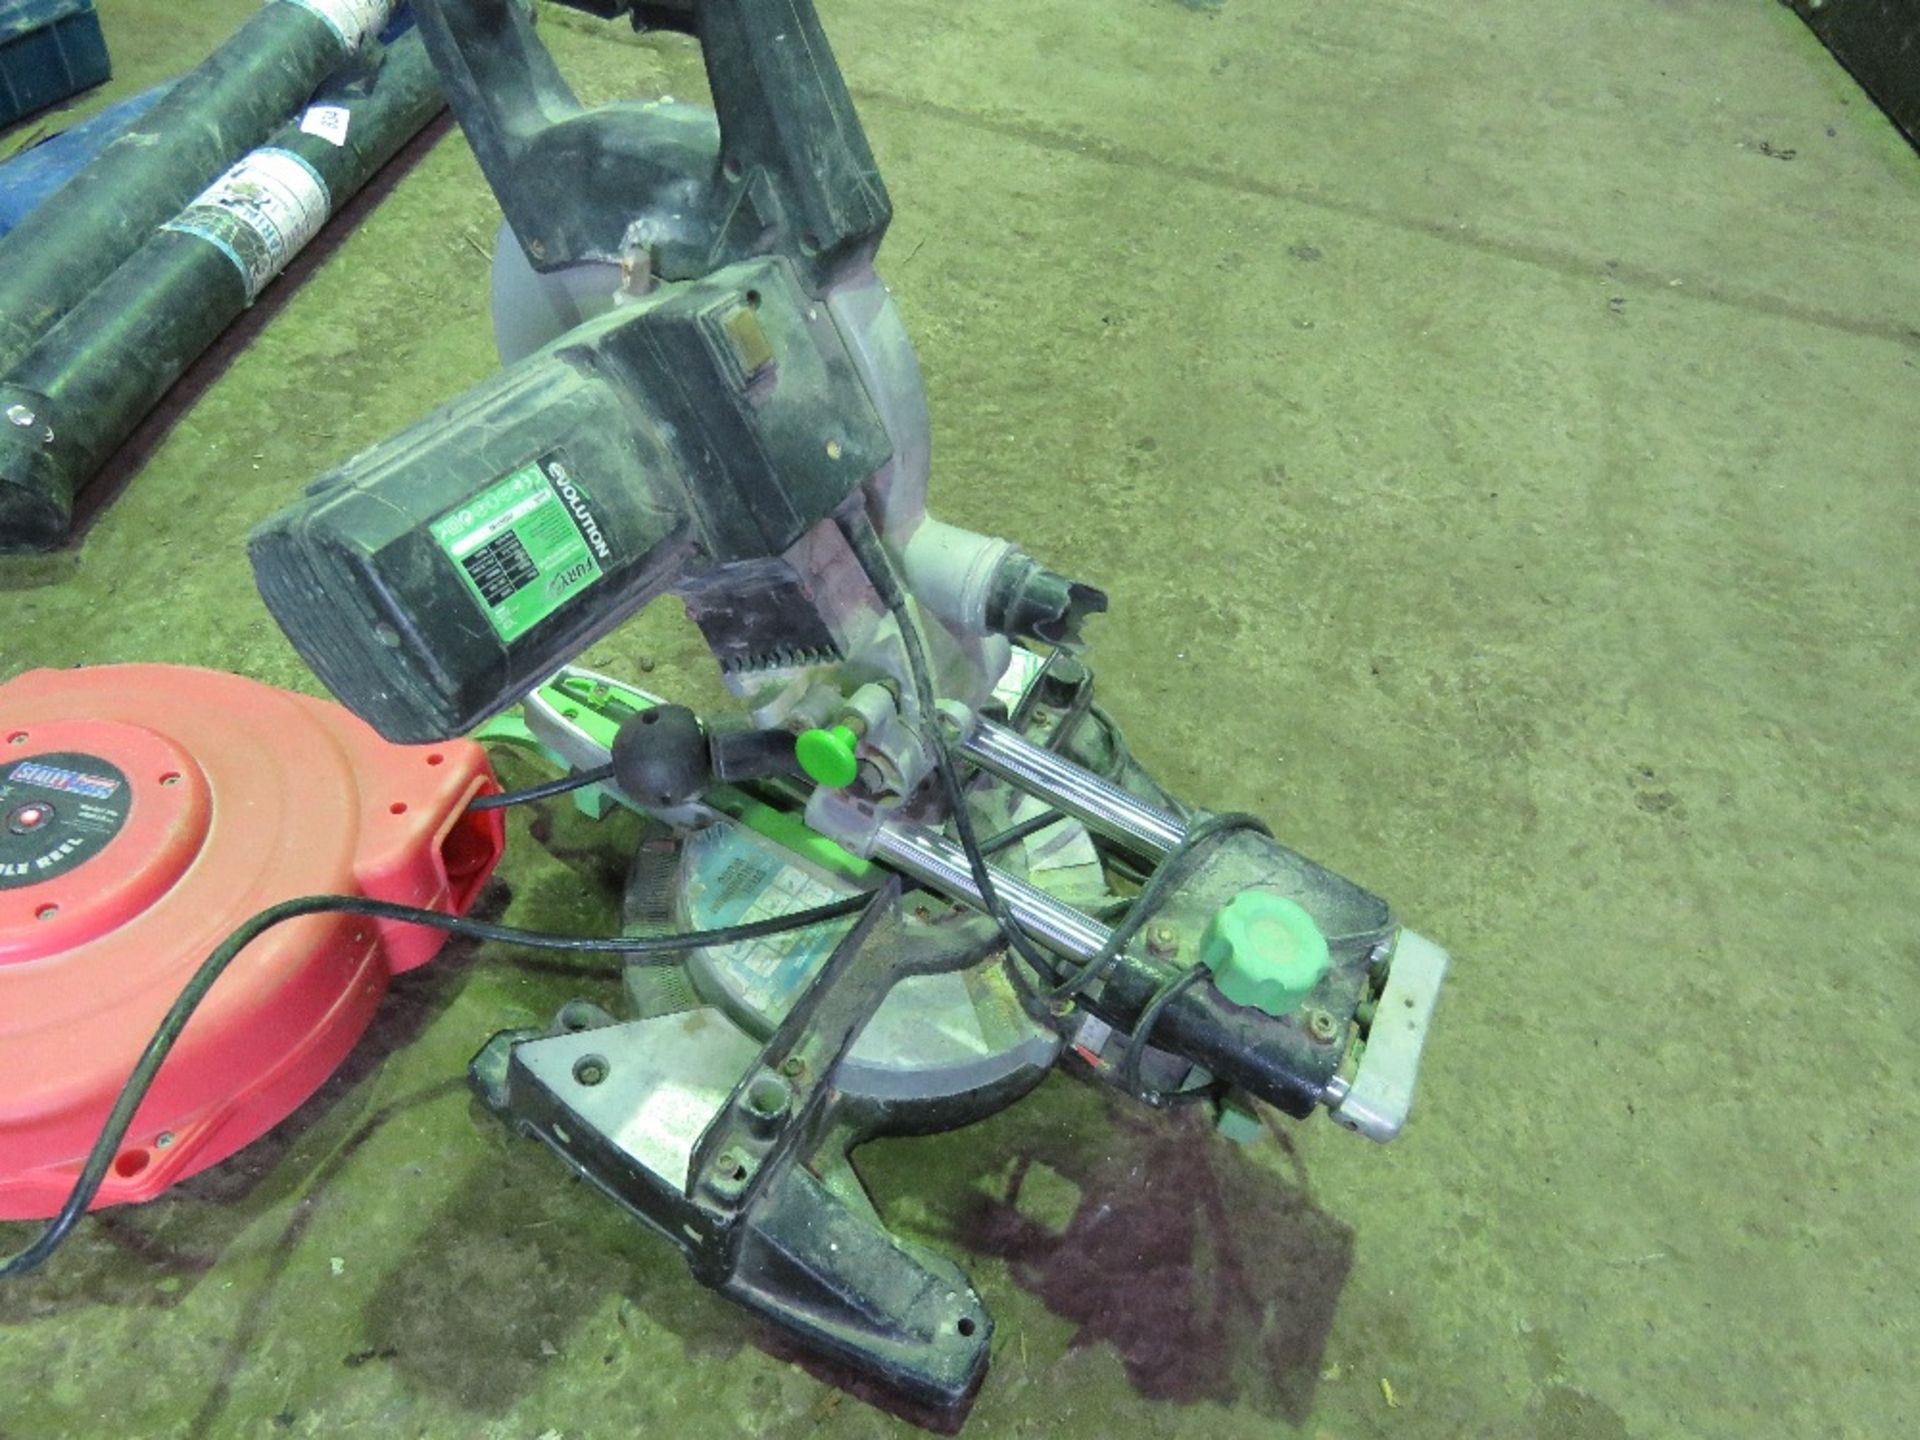 EVOLUTION 240VOLT MITRE SAW PLUS A RETRACTABLE CABLE REEL. COMPANY LIQUIDATION STOCK. THIS LOT IS - Image 2 of 4